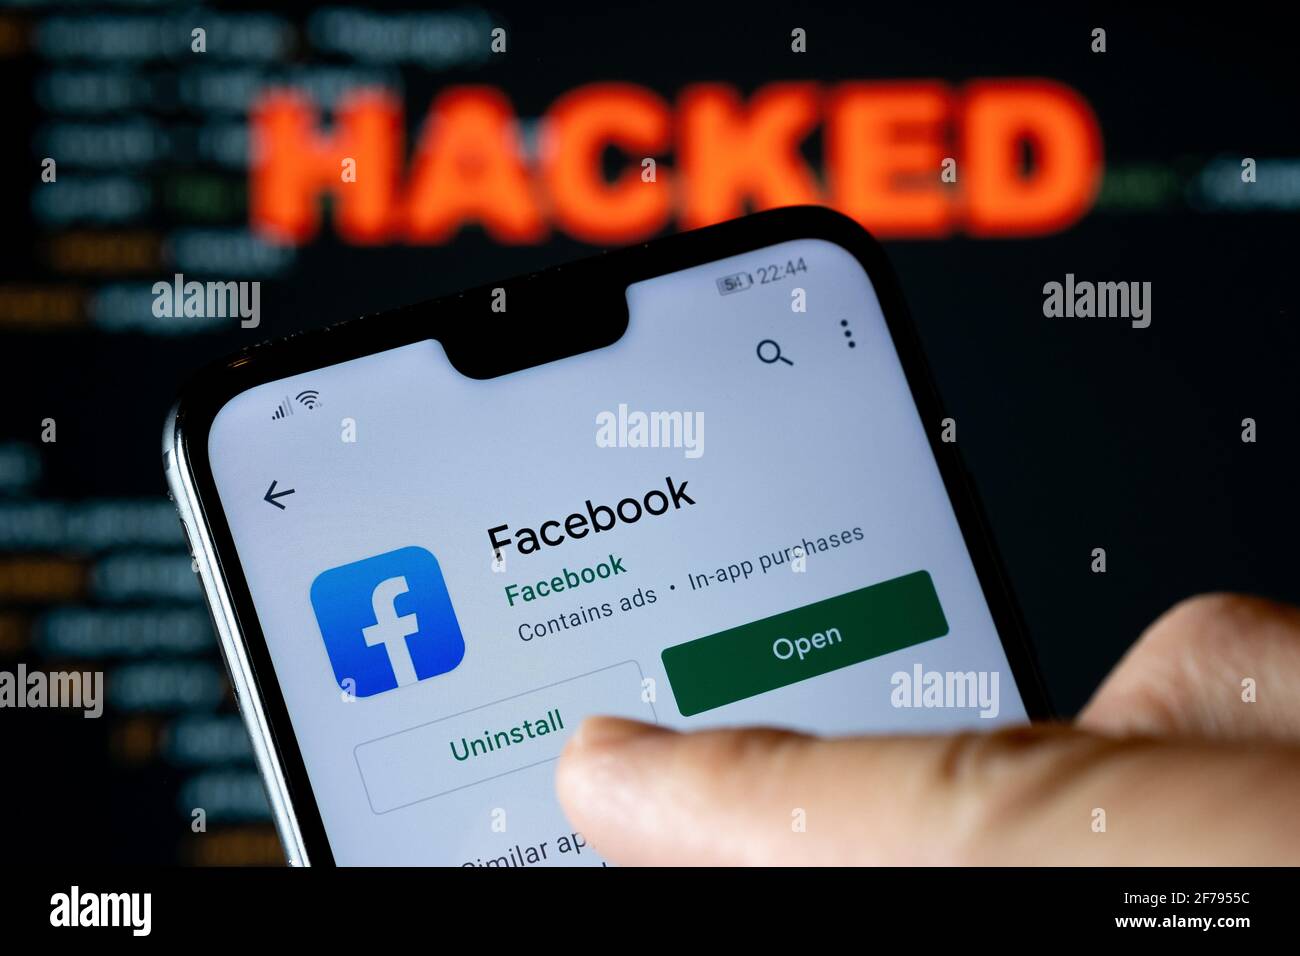 Facebook app in Play market seen on the smartphone, finger pointing at it and blurred HACKED word on the blurred background. Concept. Stafford, United Stock Photo